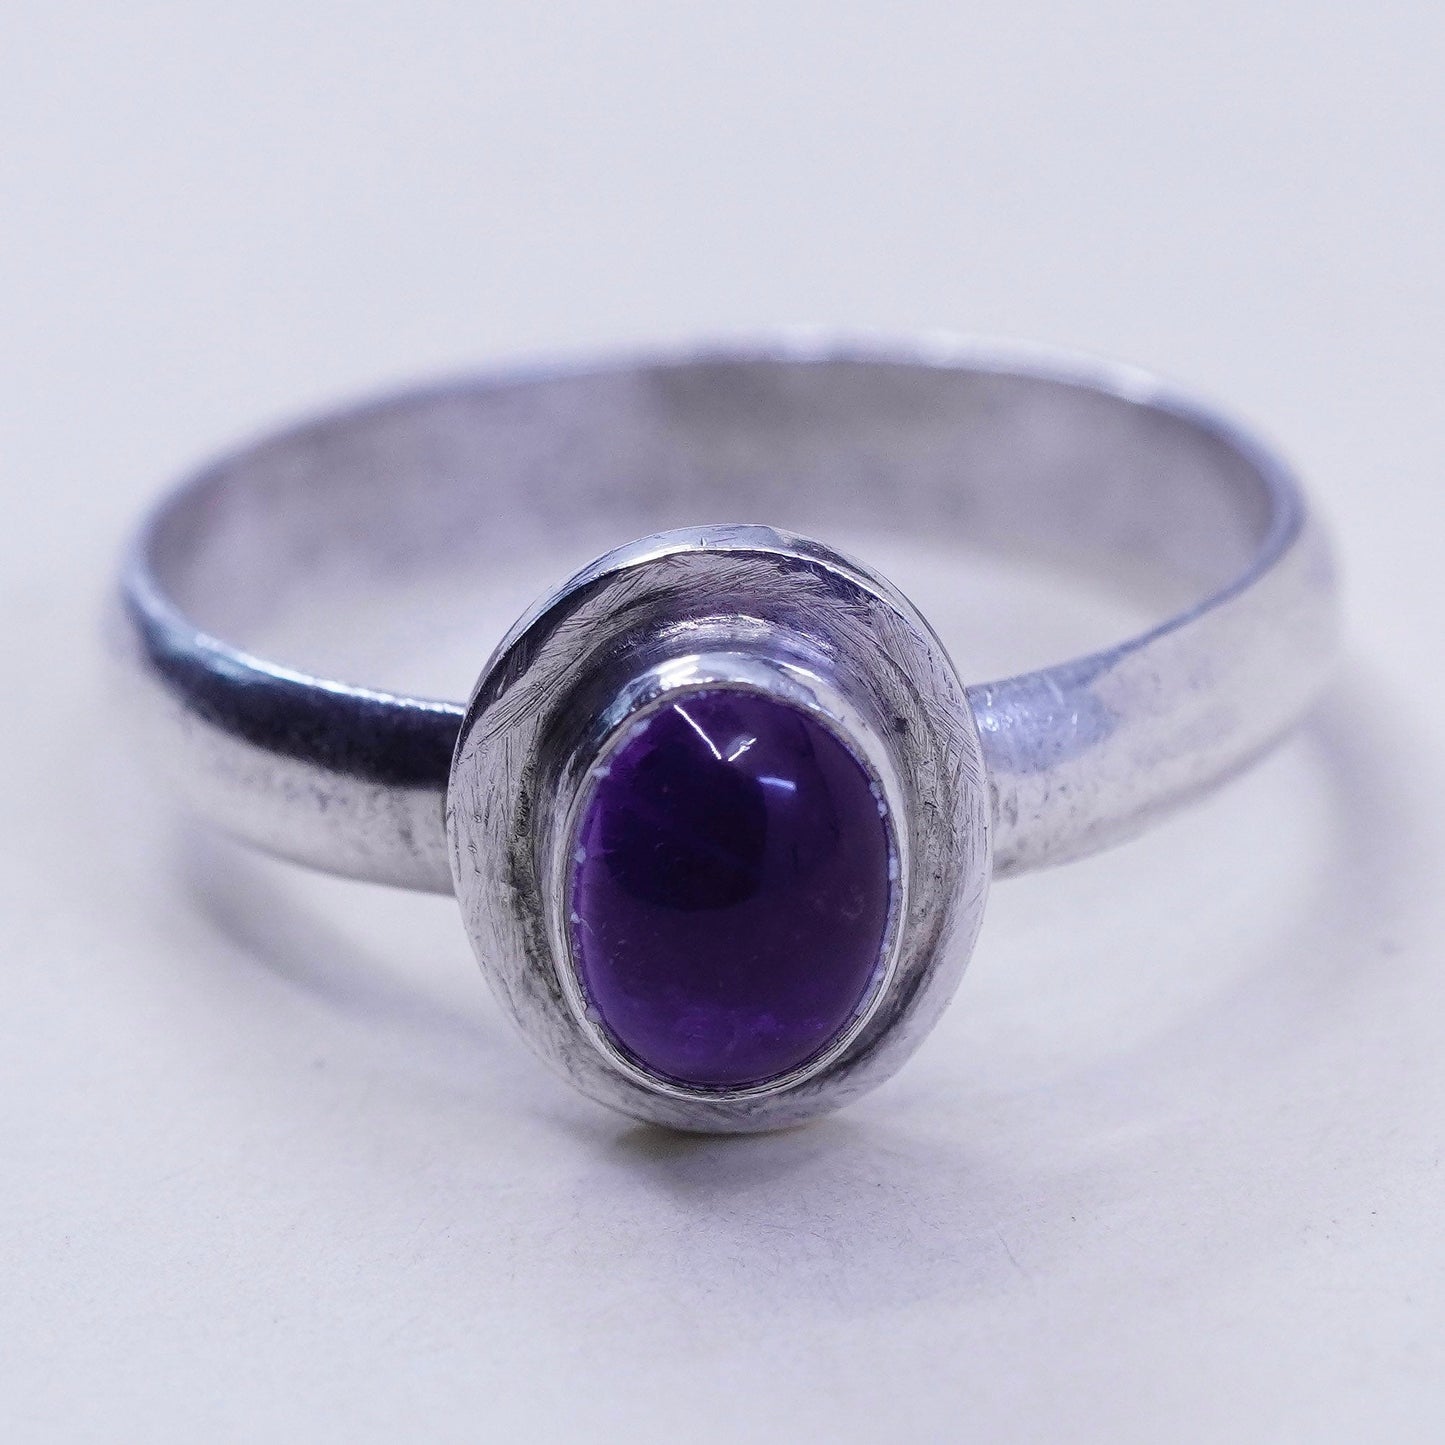 Size 7.5, vintage Sterling 925 silver handmade cocktail ring with amethyst